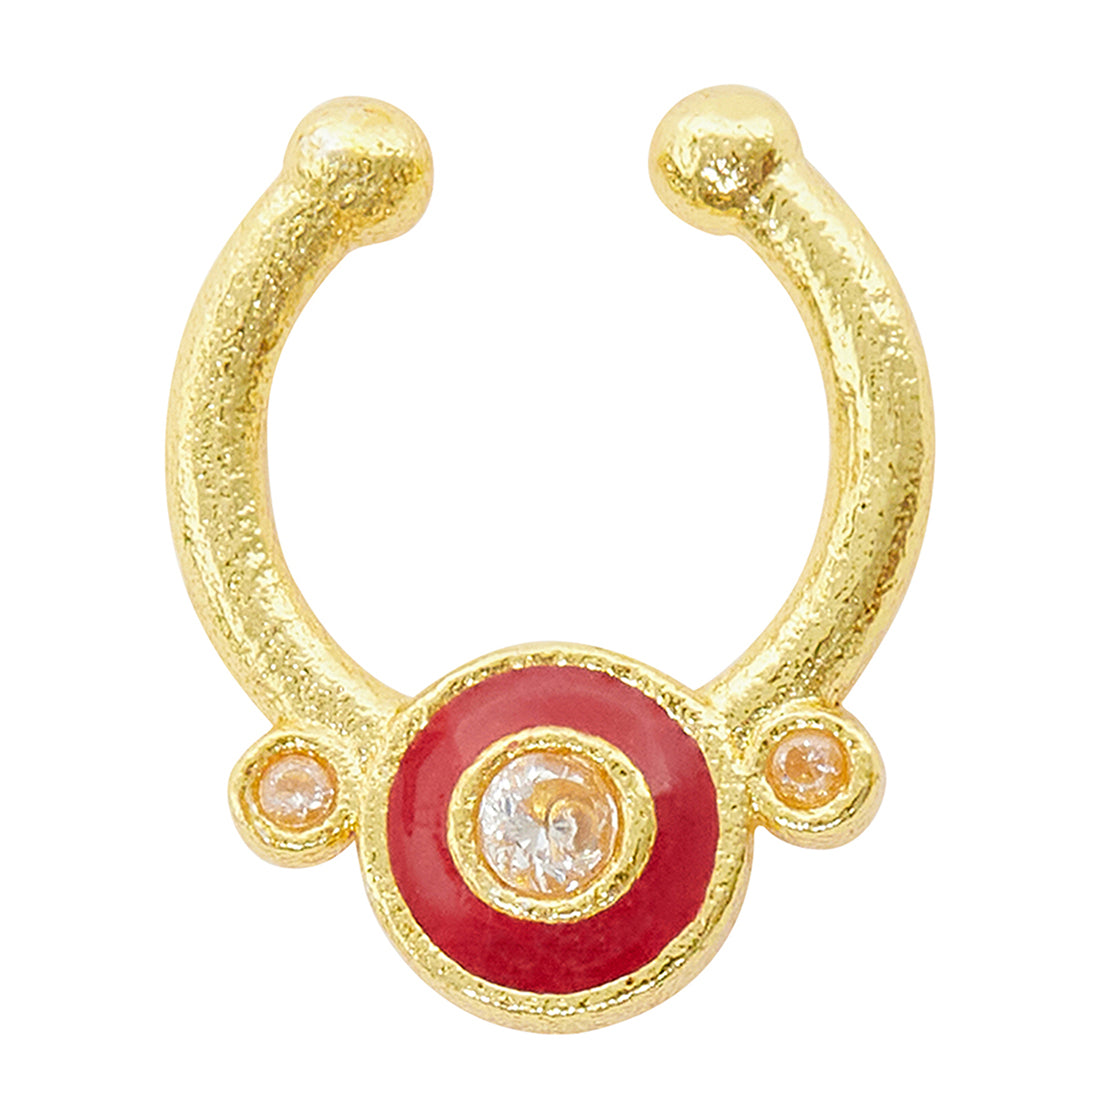 Buy Azai by Nykaa Fashion Festive Patterned Gold Nose Ring With Chain online